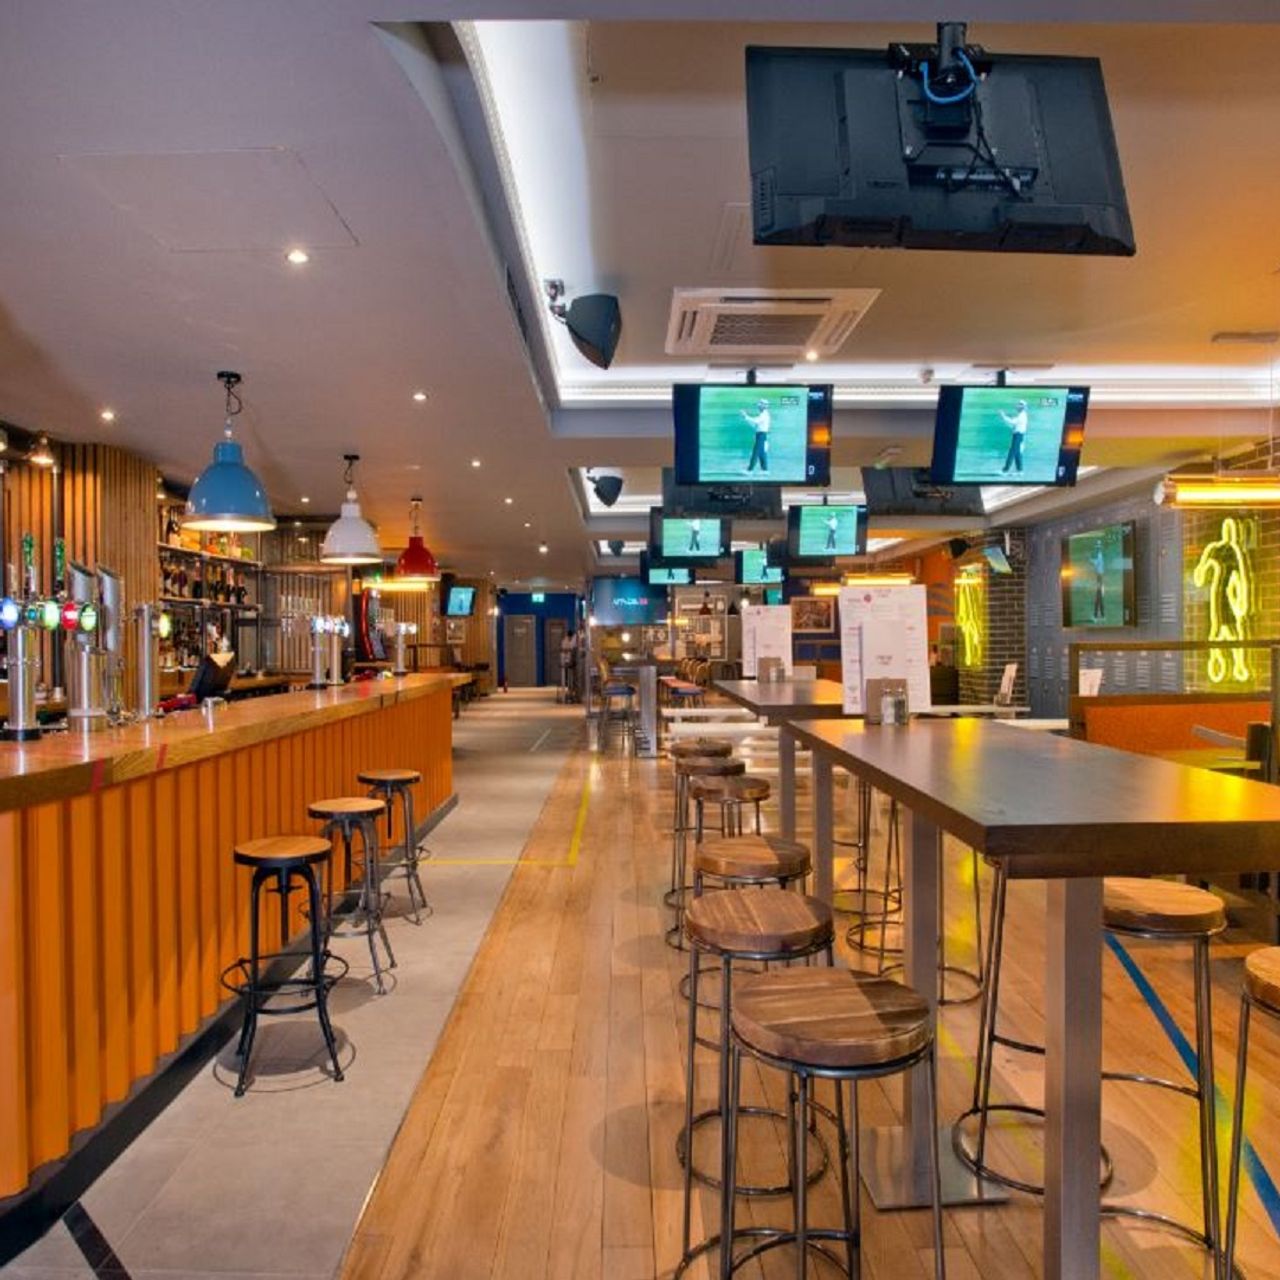 Sports Bar & Grill Canary Wharf - Sports Bar in London - Pubs Serving Food  in London